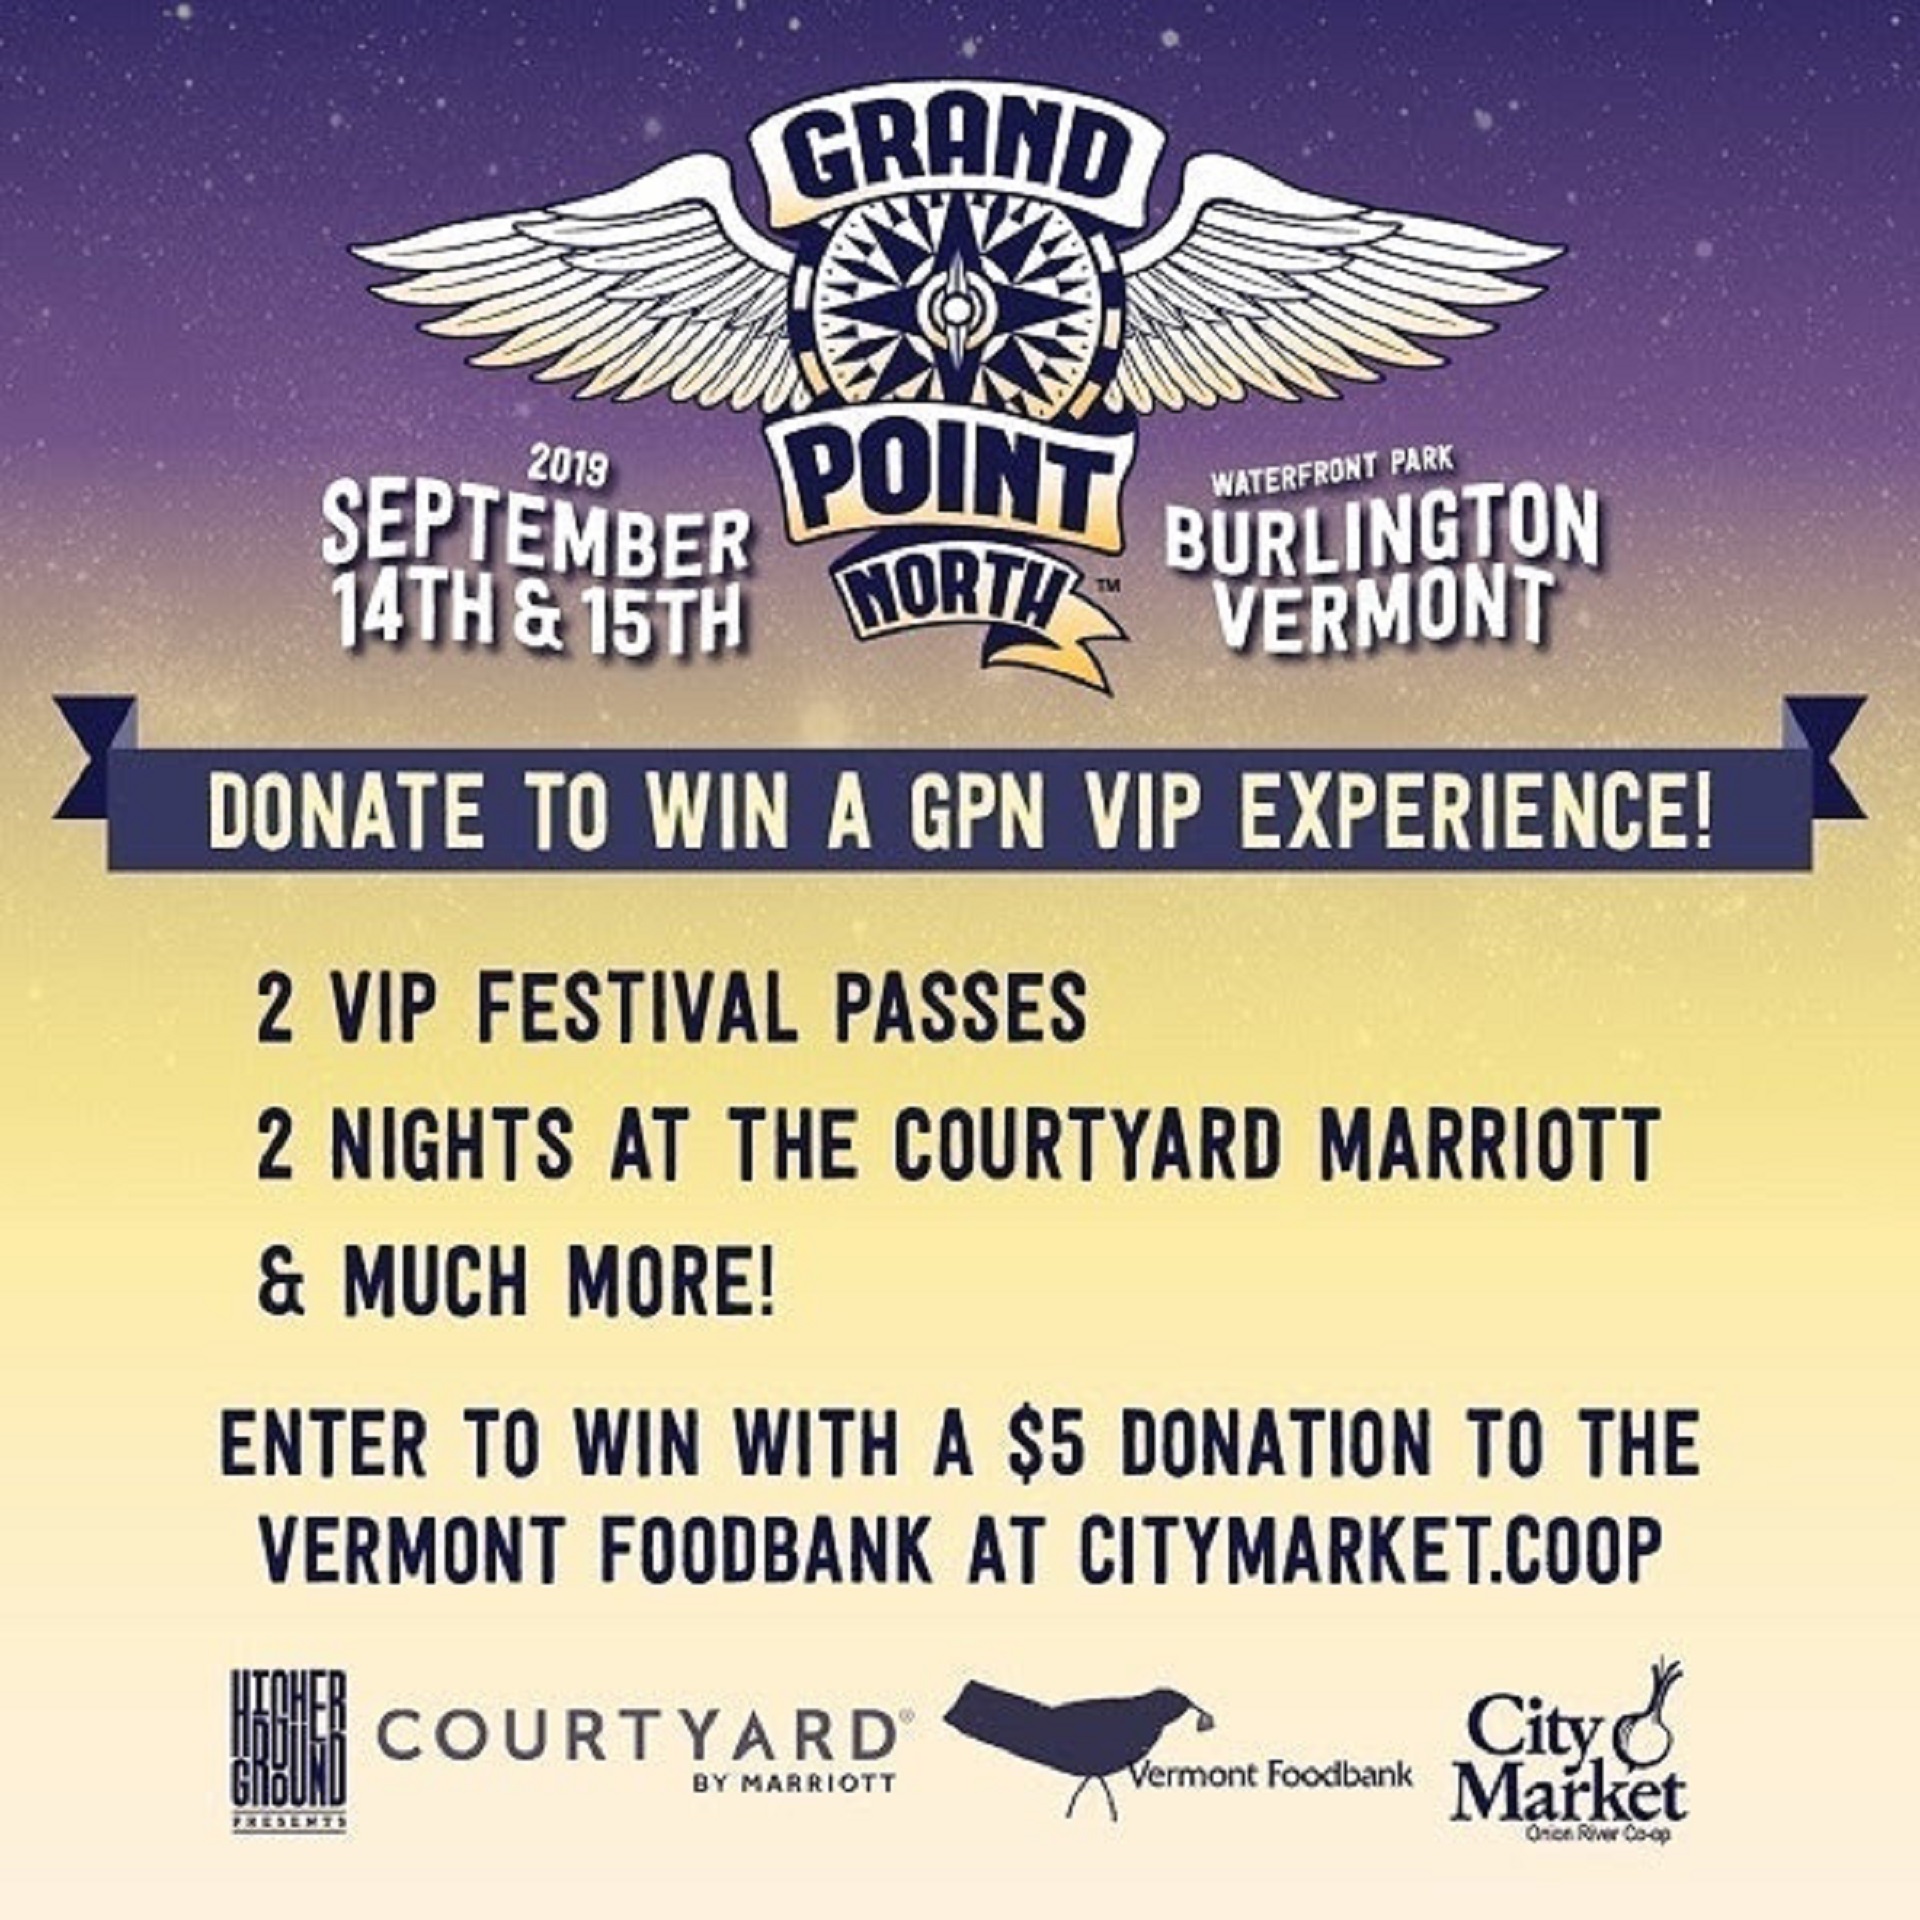 Grand Point North Partners With City Market To Benefit the Vermont Foodbank